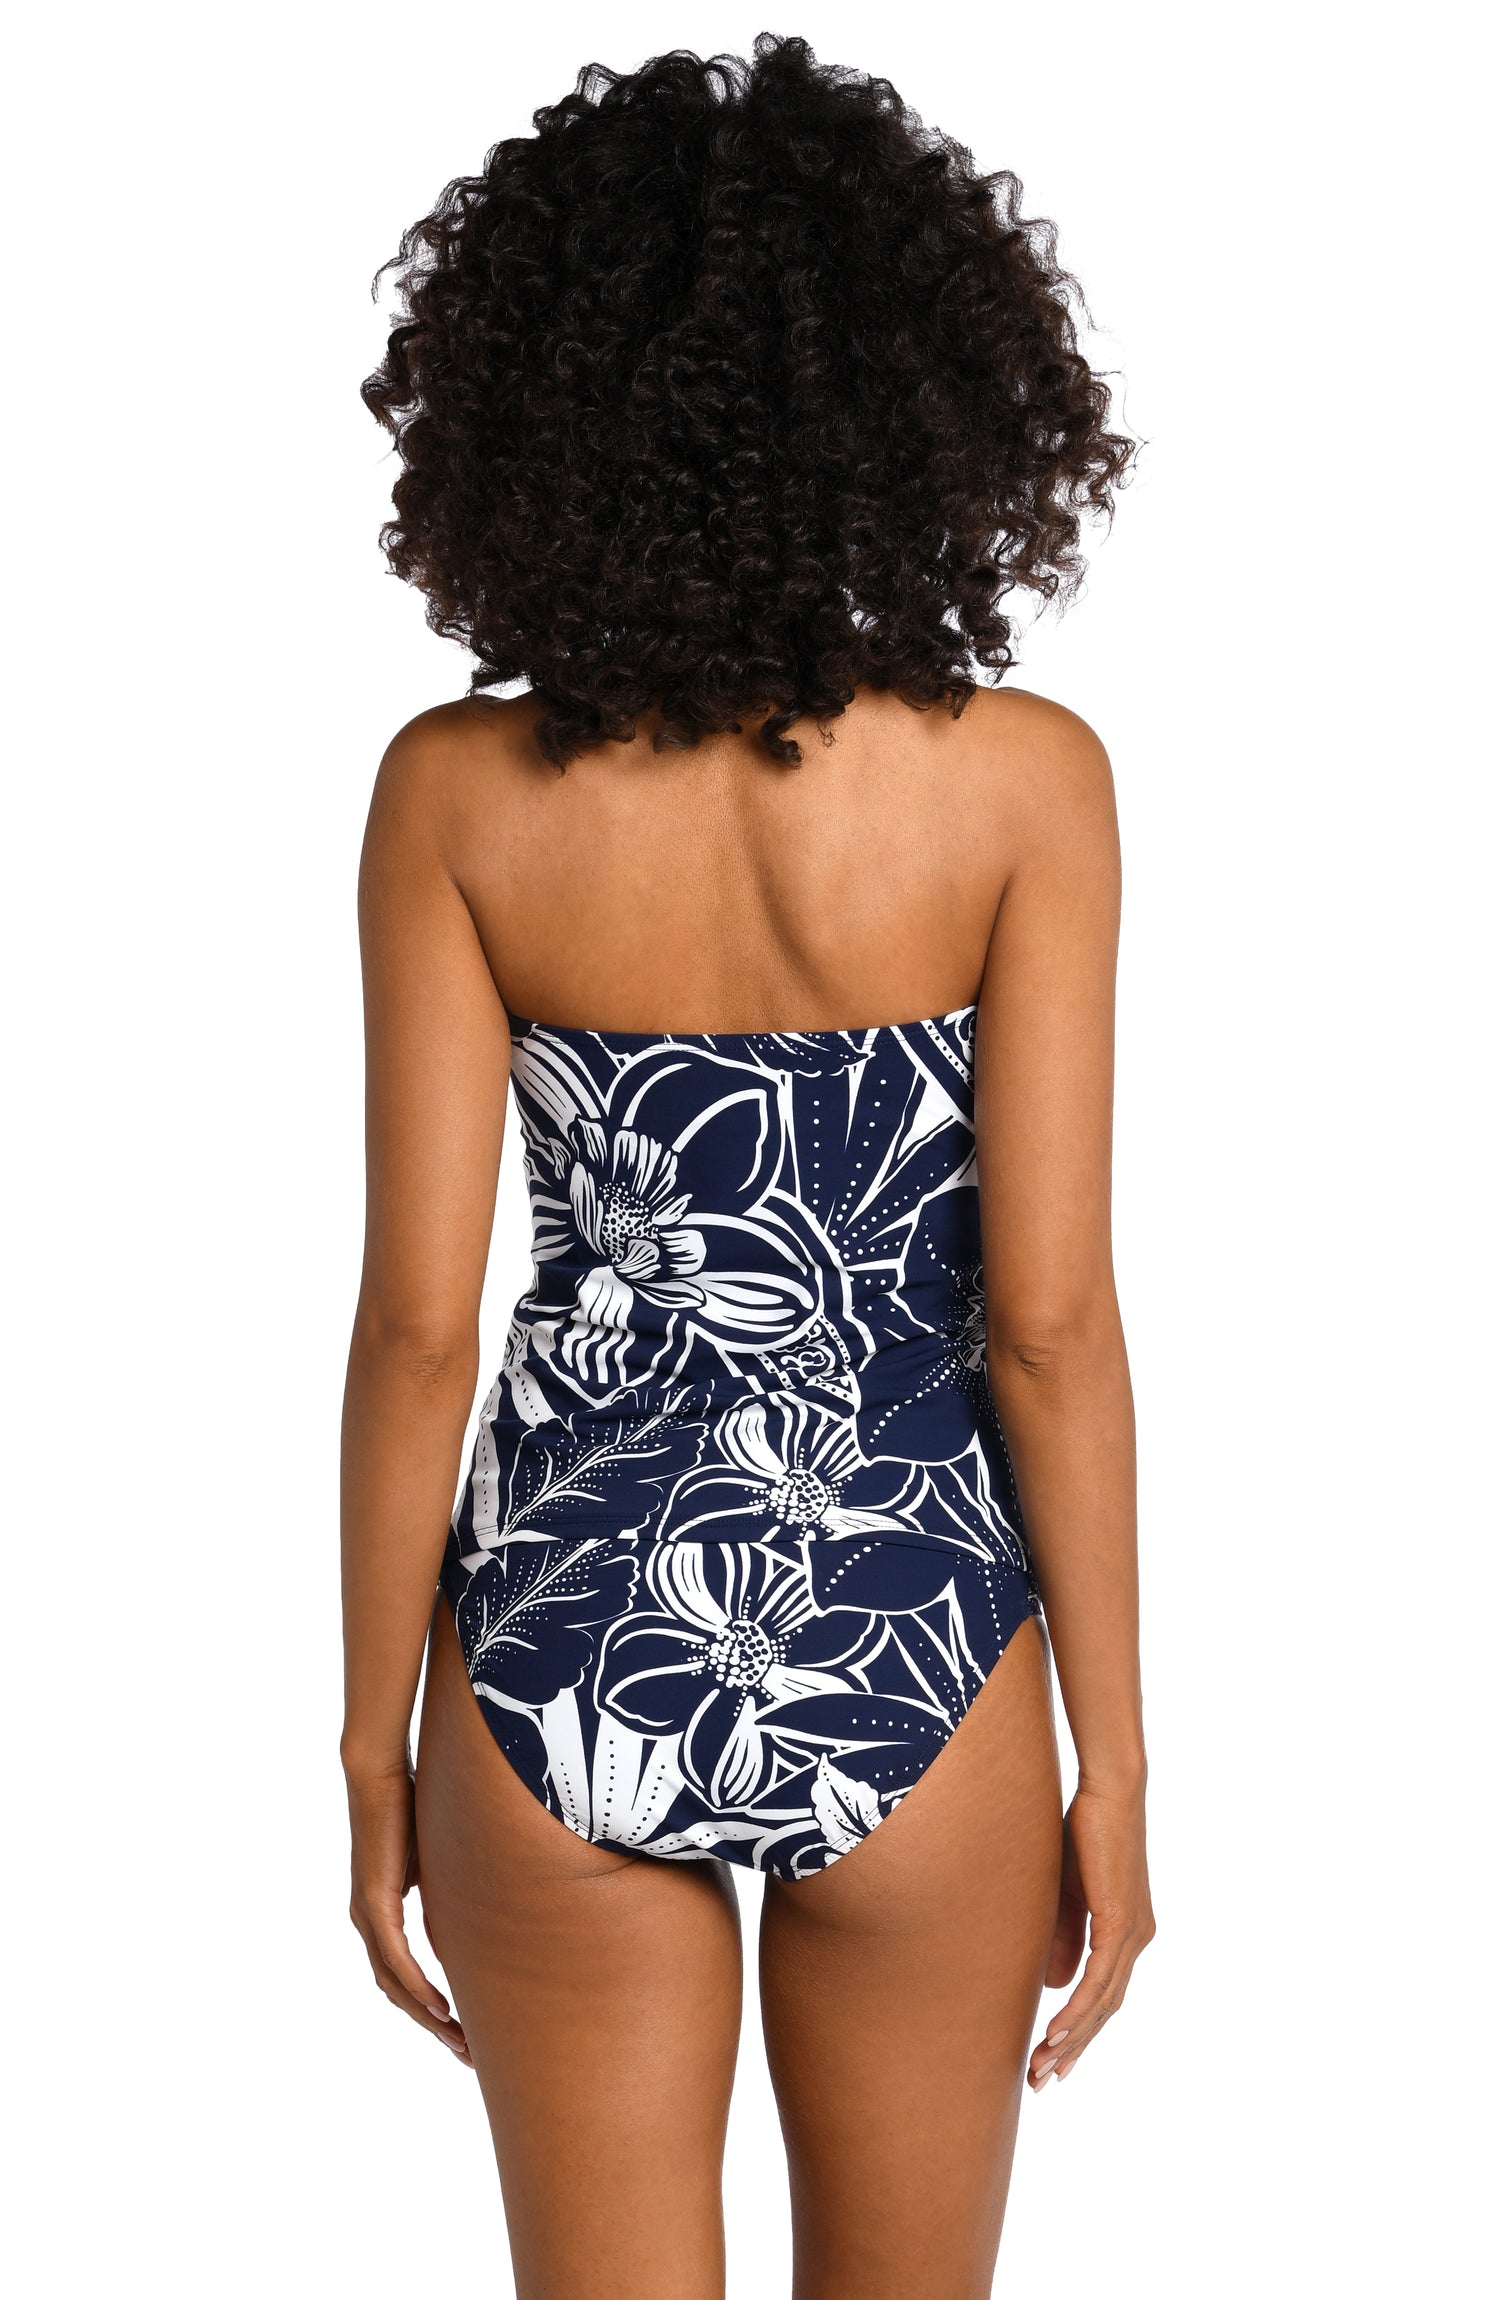 Model is wearing an indigo colored print with pops of white on bandeau tankini top from our At the Playa collection!